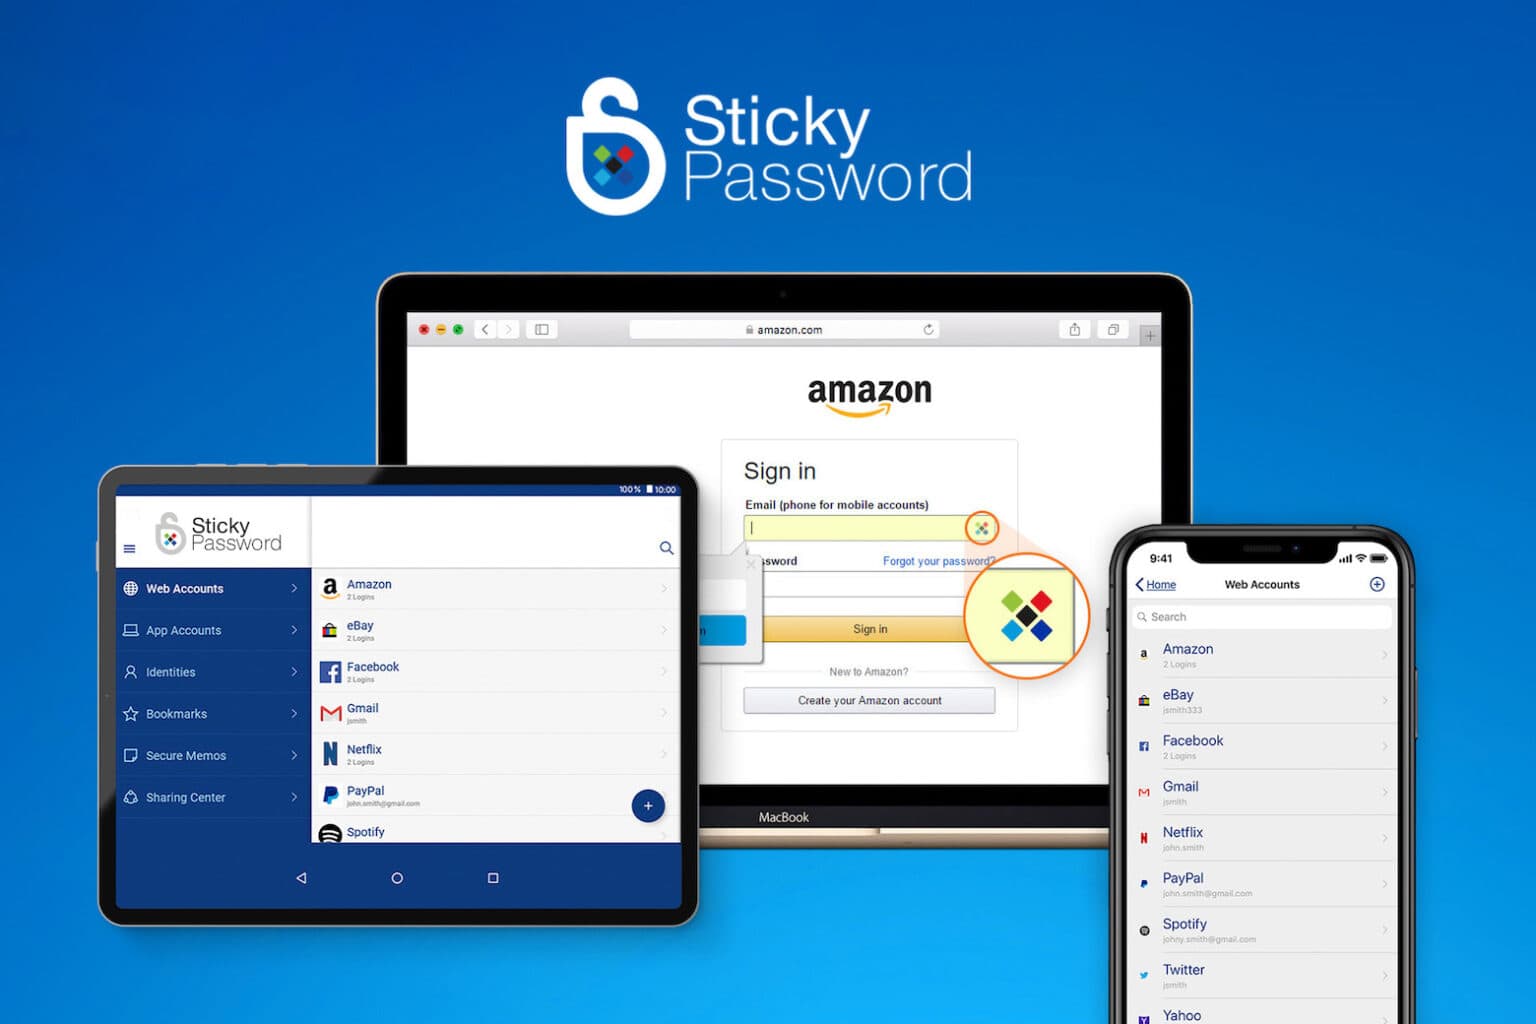 Ensure your online privacy with help from Sticky Password Premium for only $19.97.